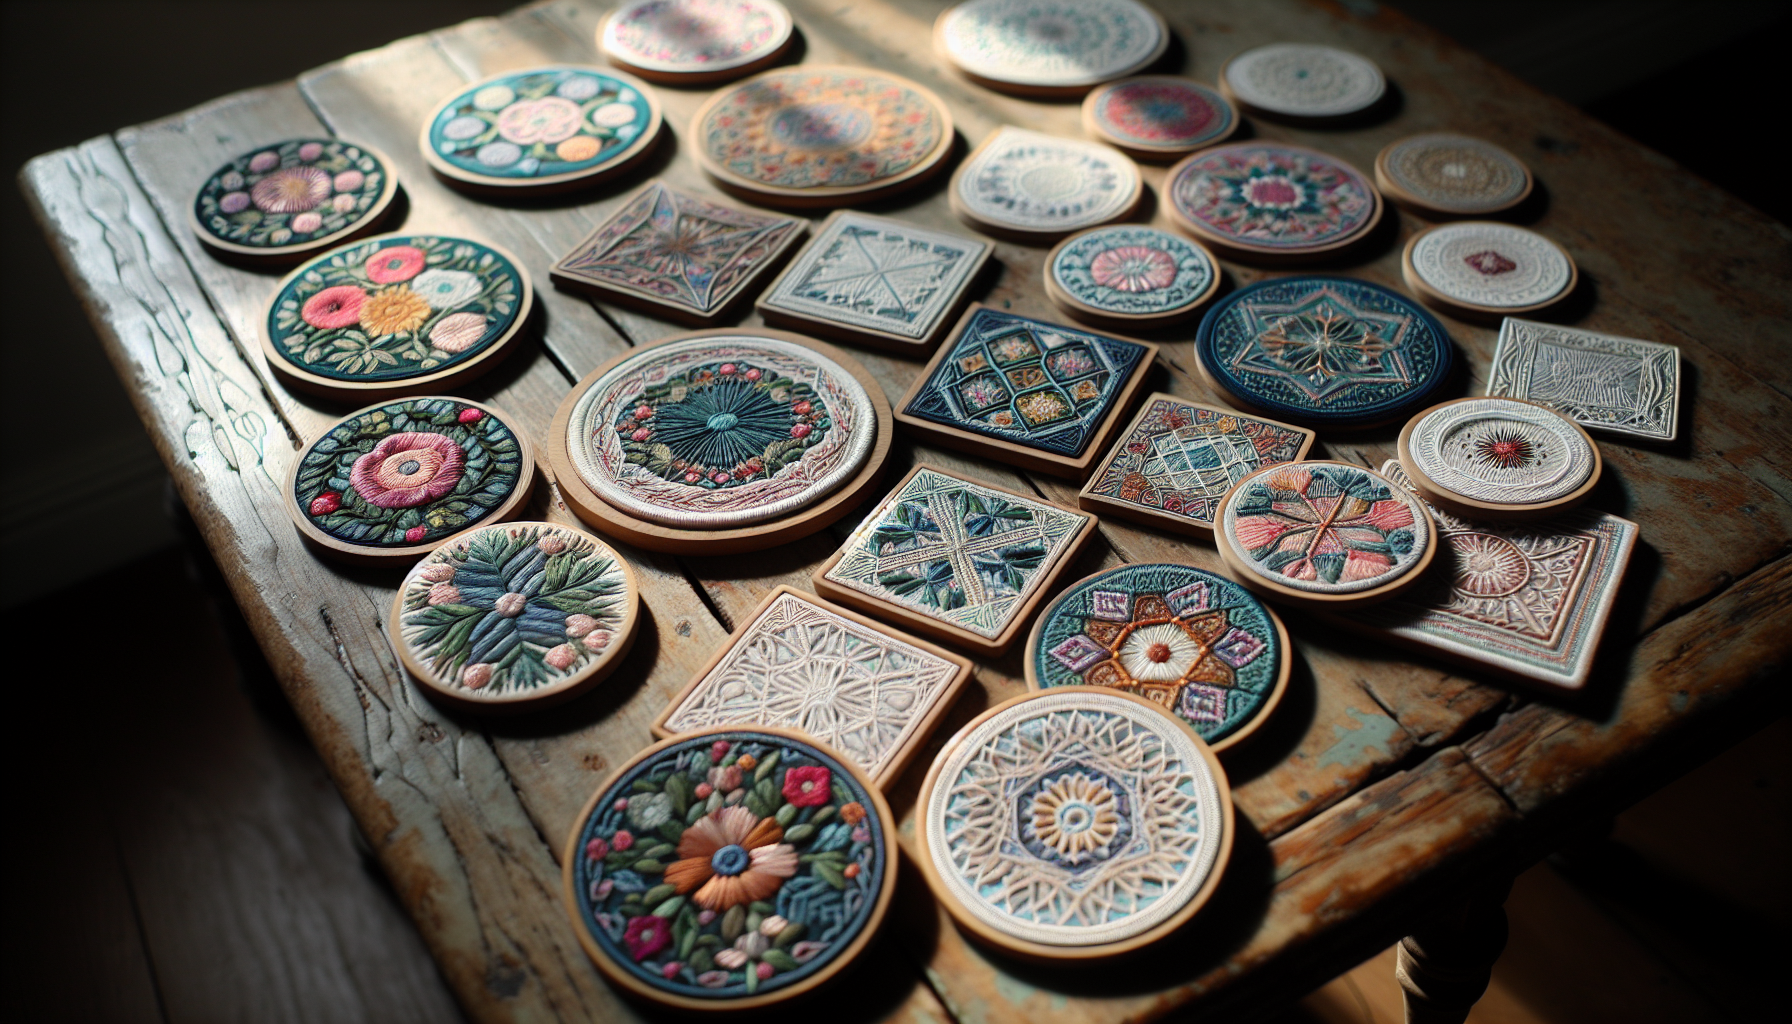 Beautiful embroidered coaster designs